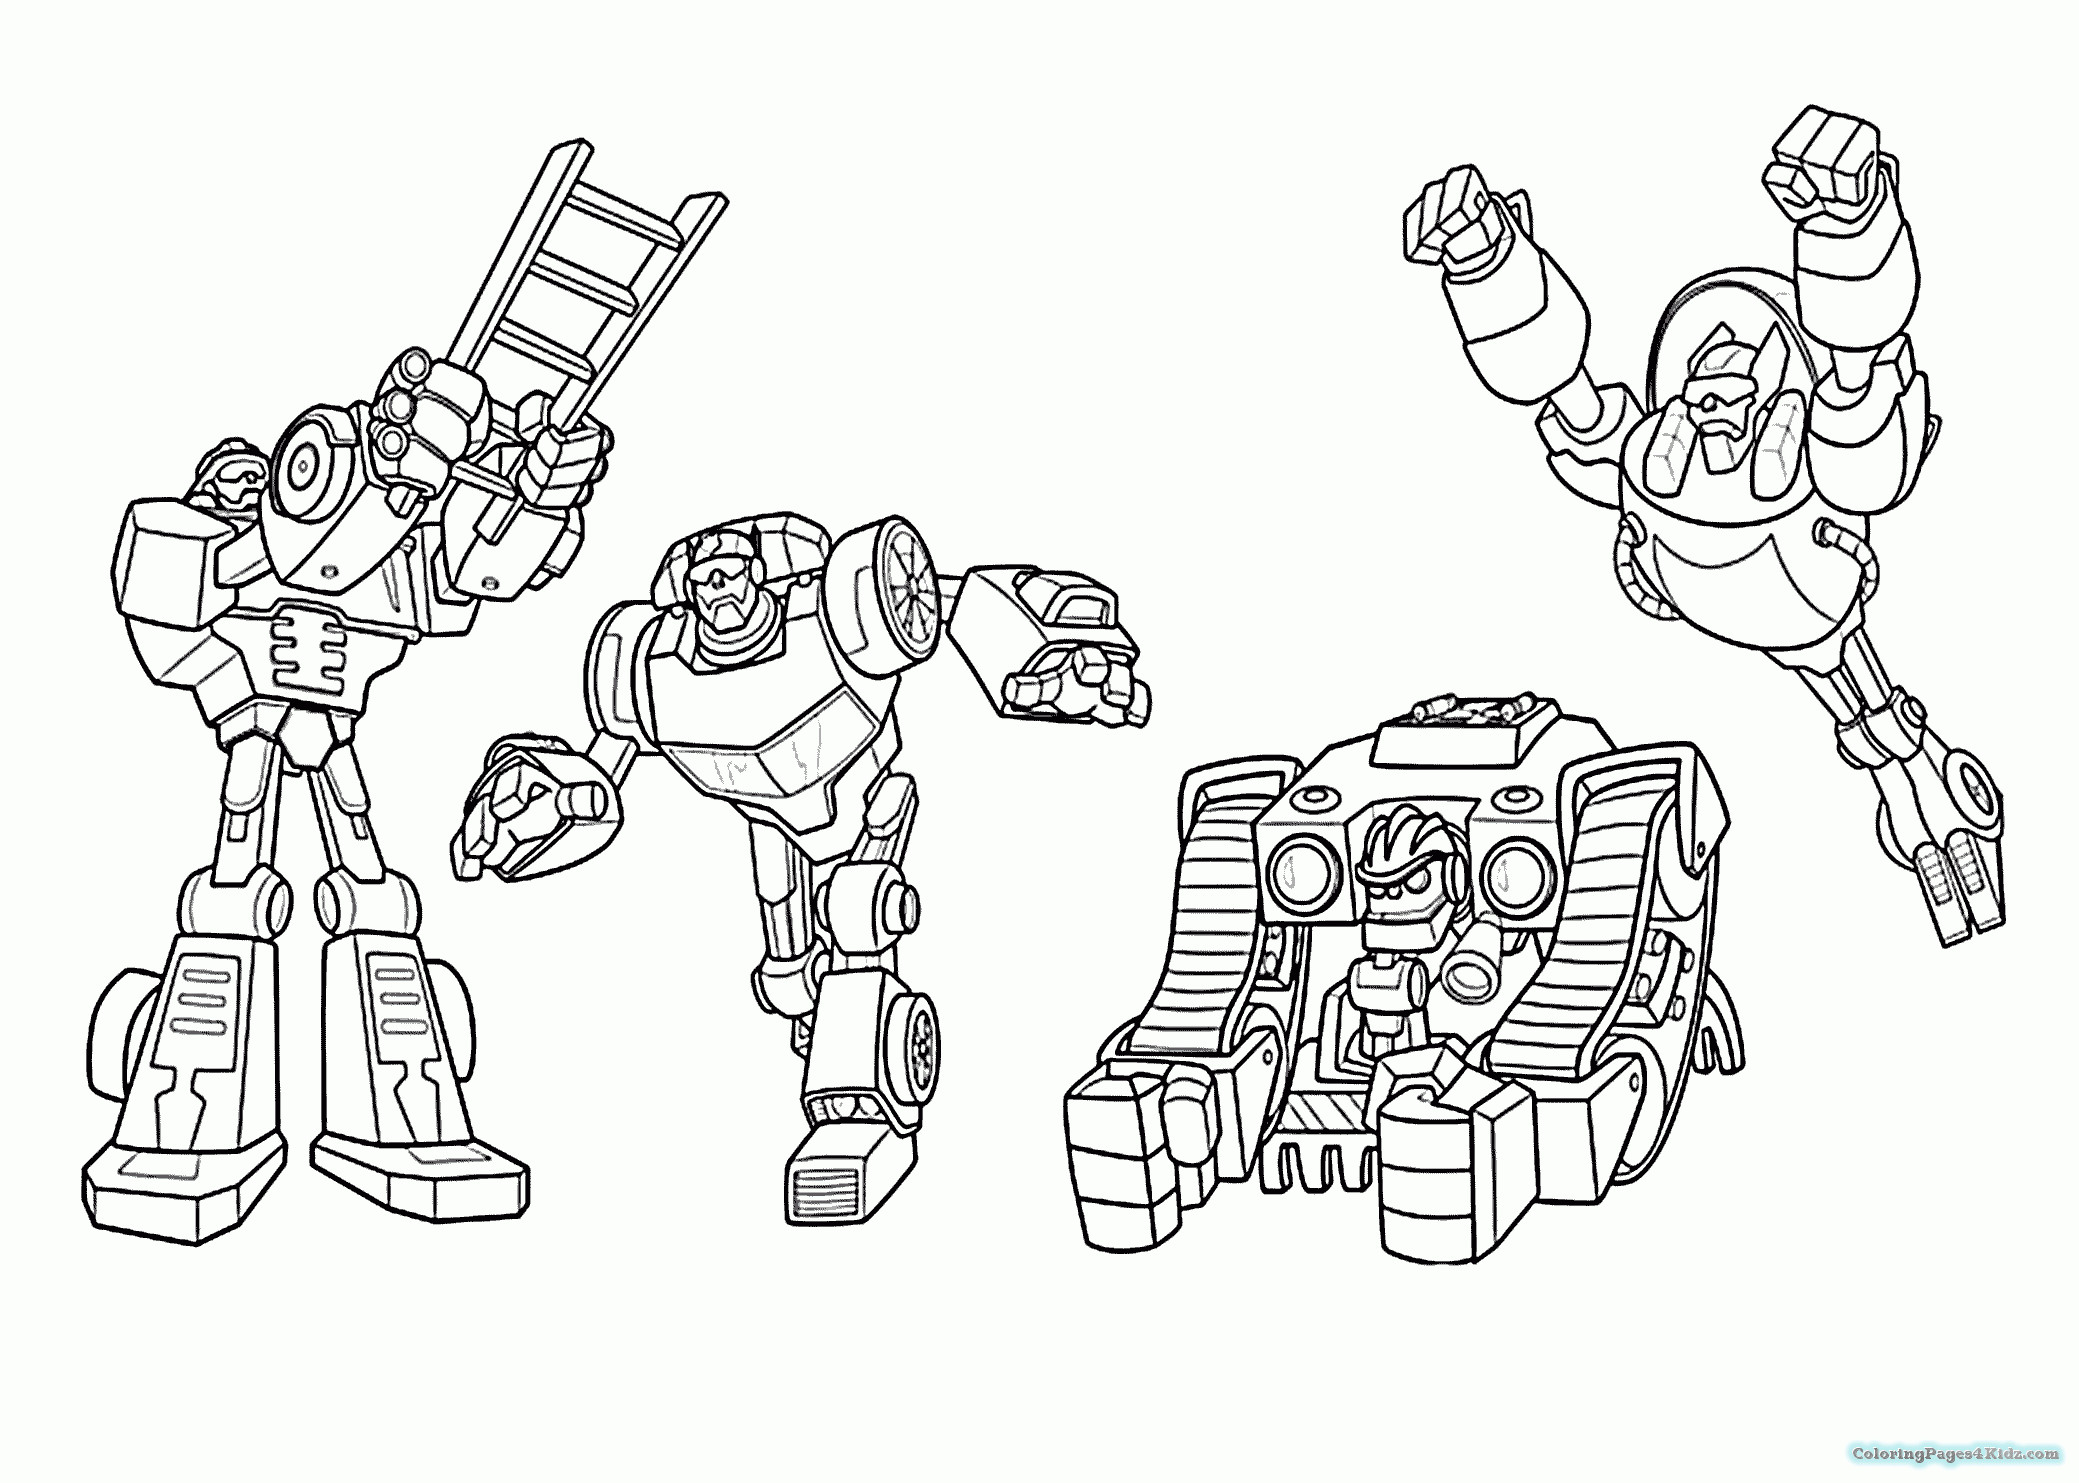 Rescue Bot Coloring Pages
 Printable Coloring Pages Rescue Bots